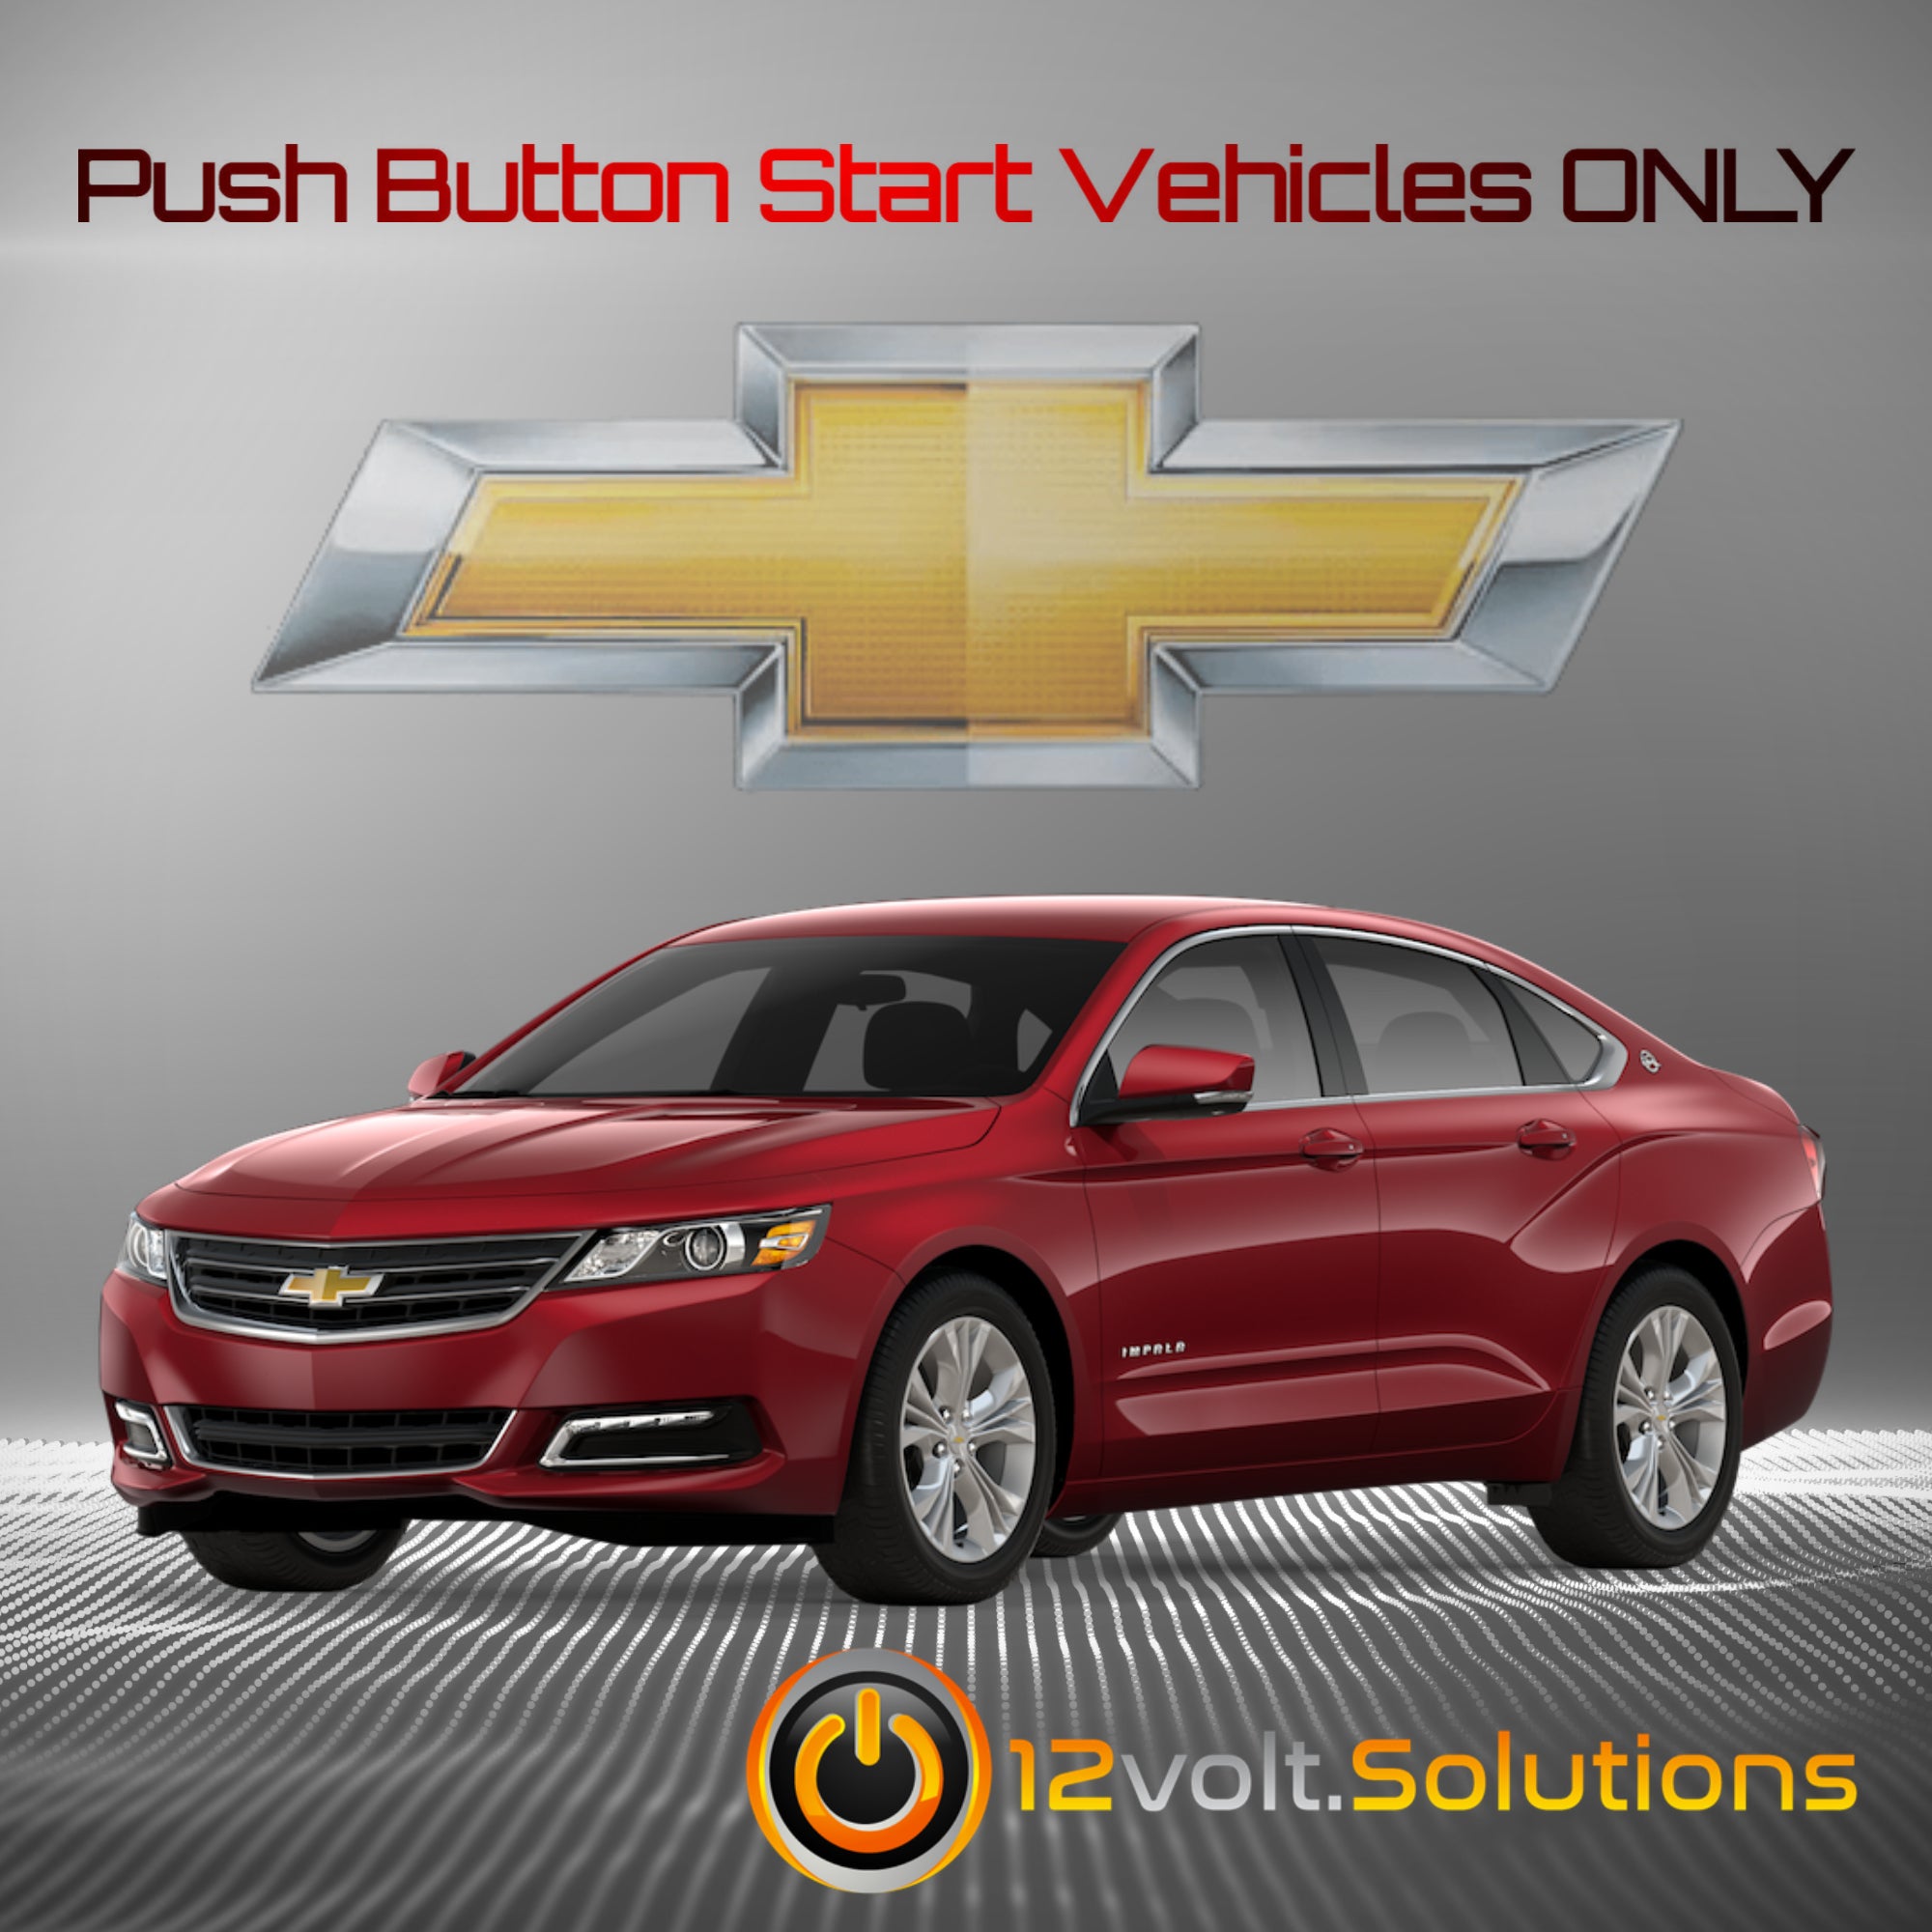 2014-2020 Chevrolet Impala Plug and Play Remote Start Kit (Push Button Start)-12Volt.Solutions